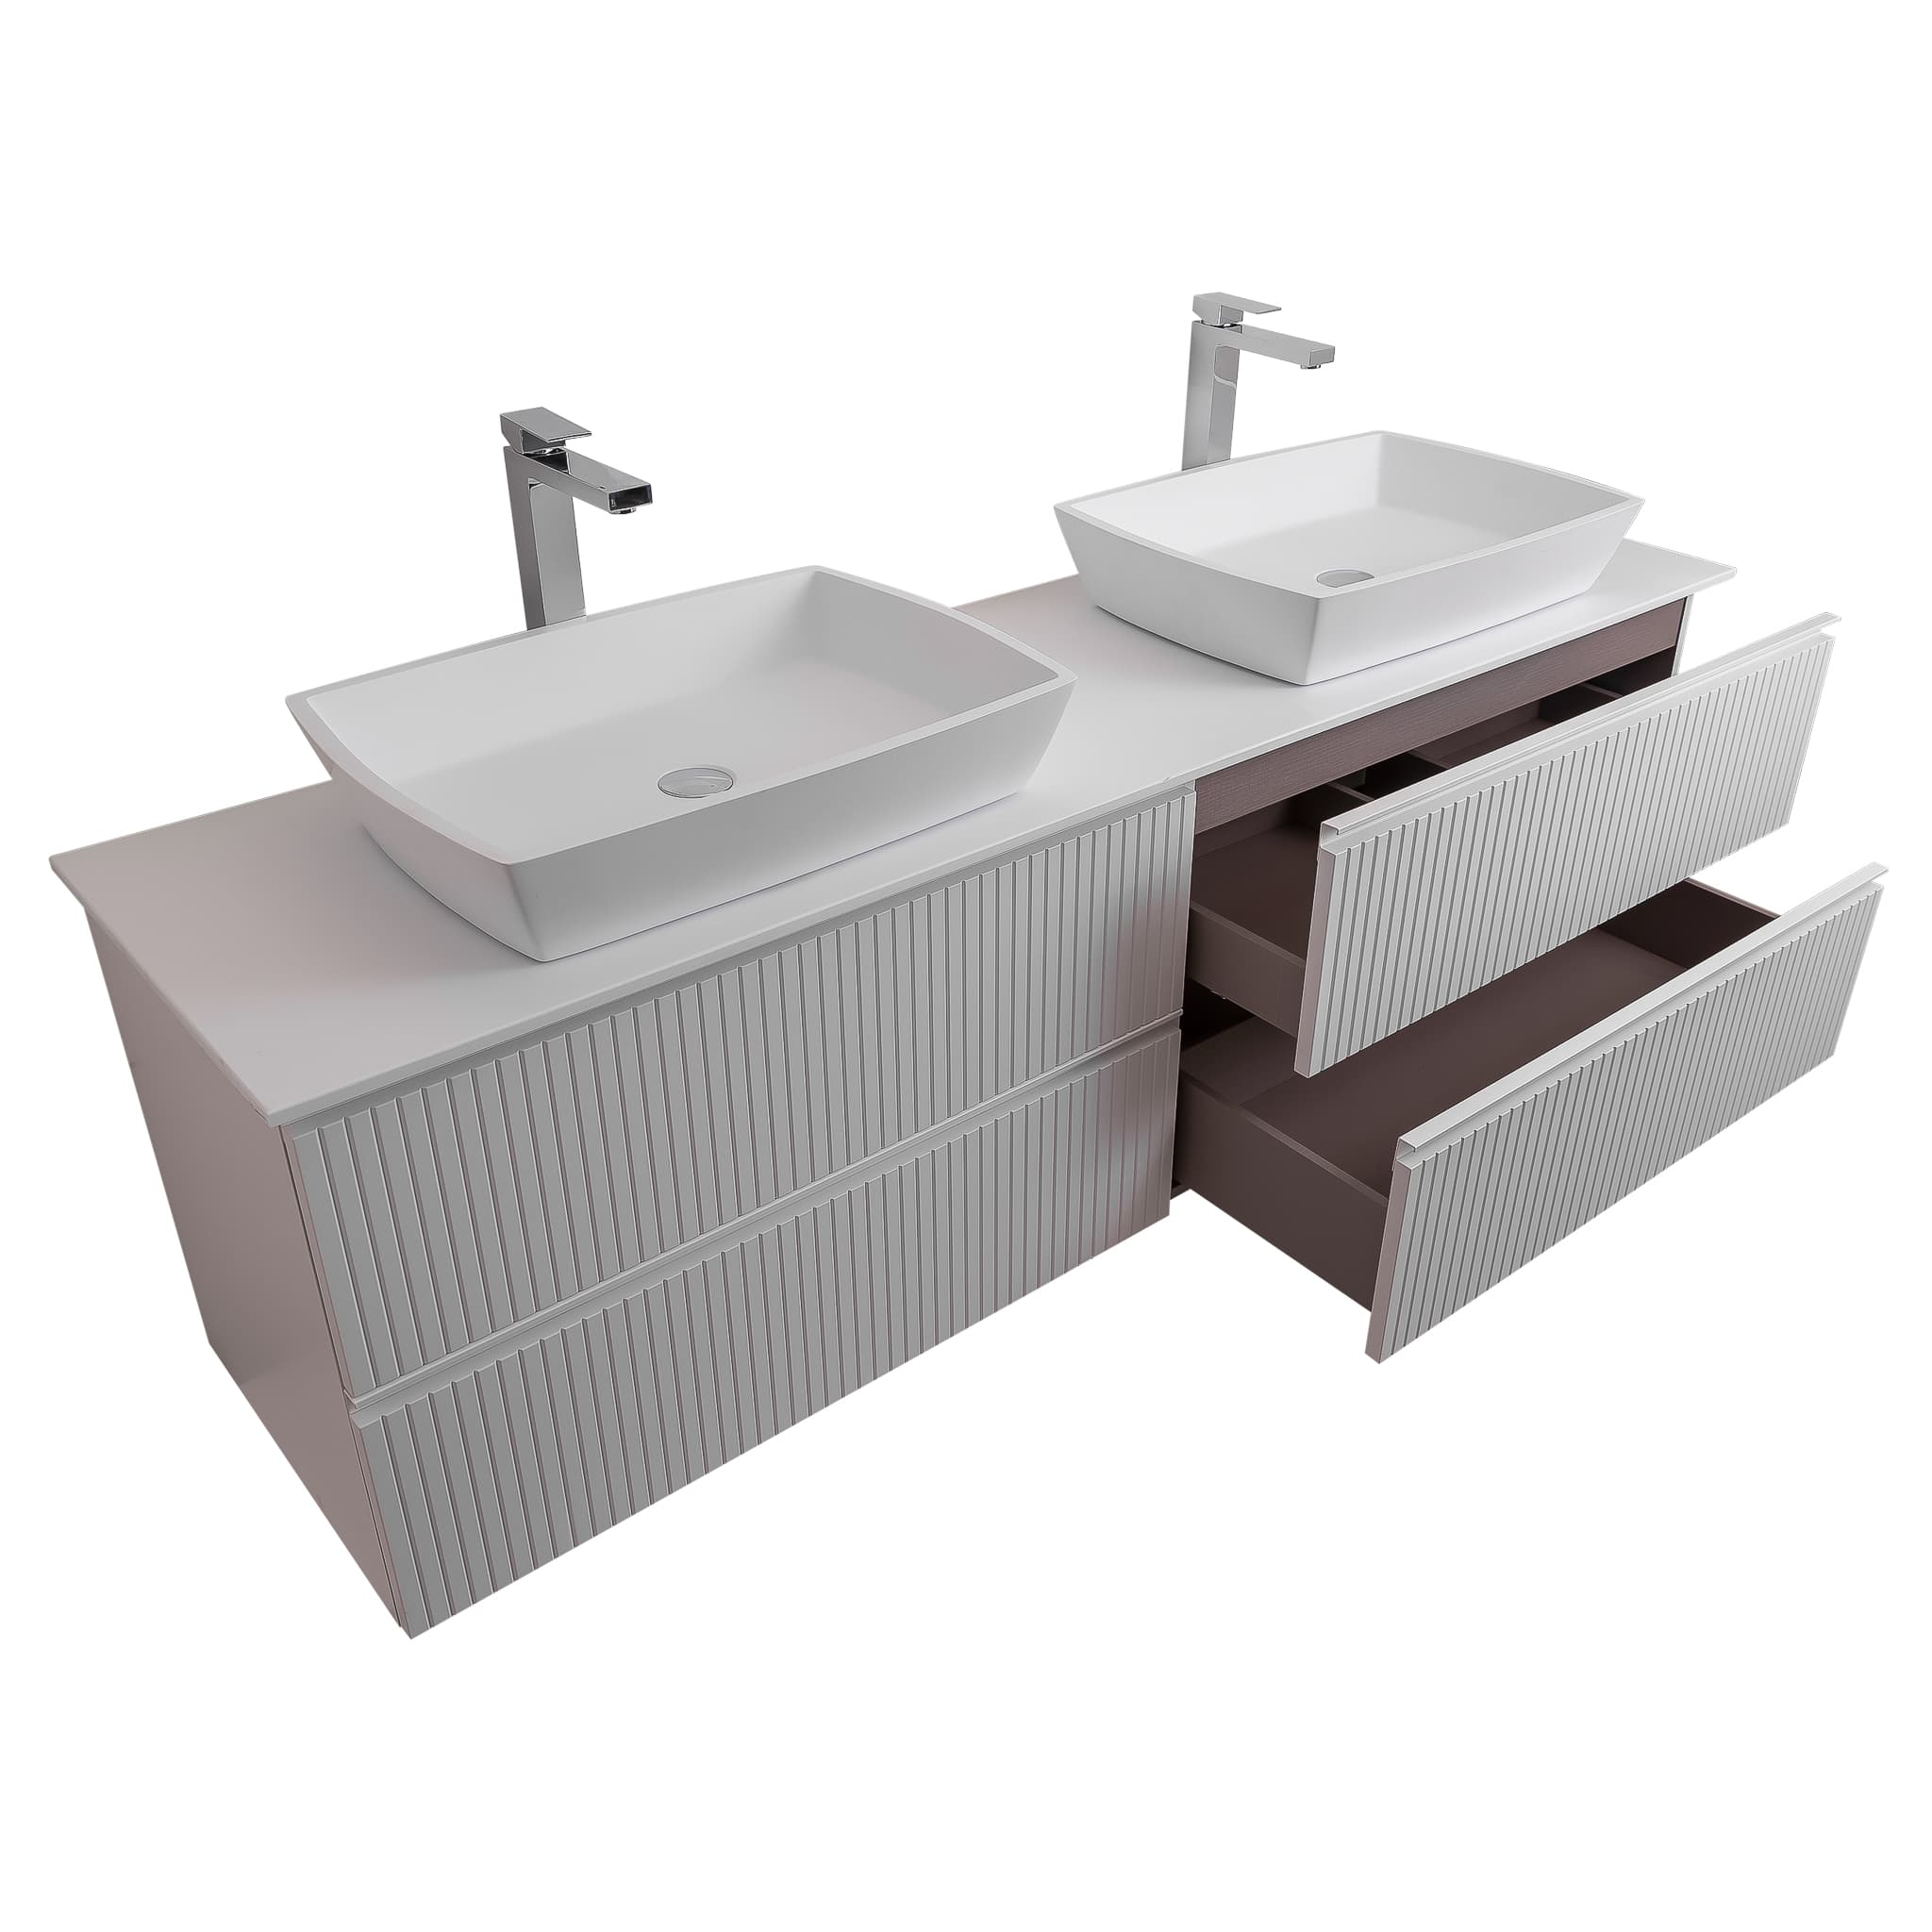 Ares 63 Matte White Cabinet, Solid Surface Flat White Counter And Two Square Solid Surface White Basin 1316, Wall Mounted Modern Vanity Set